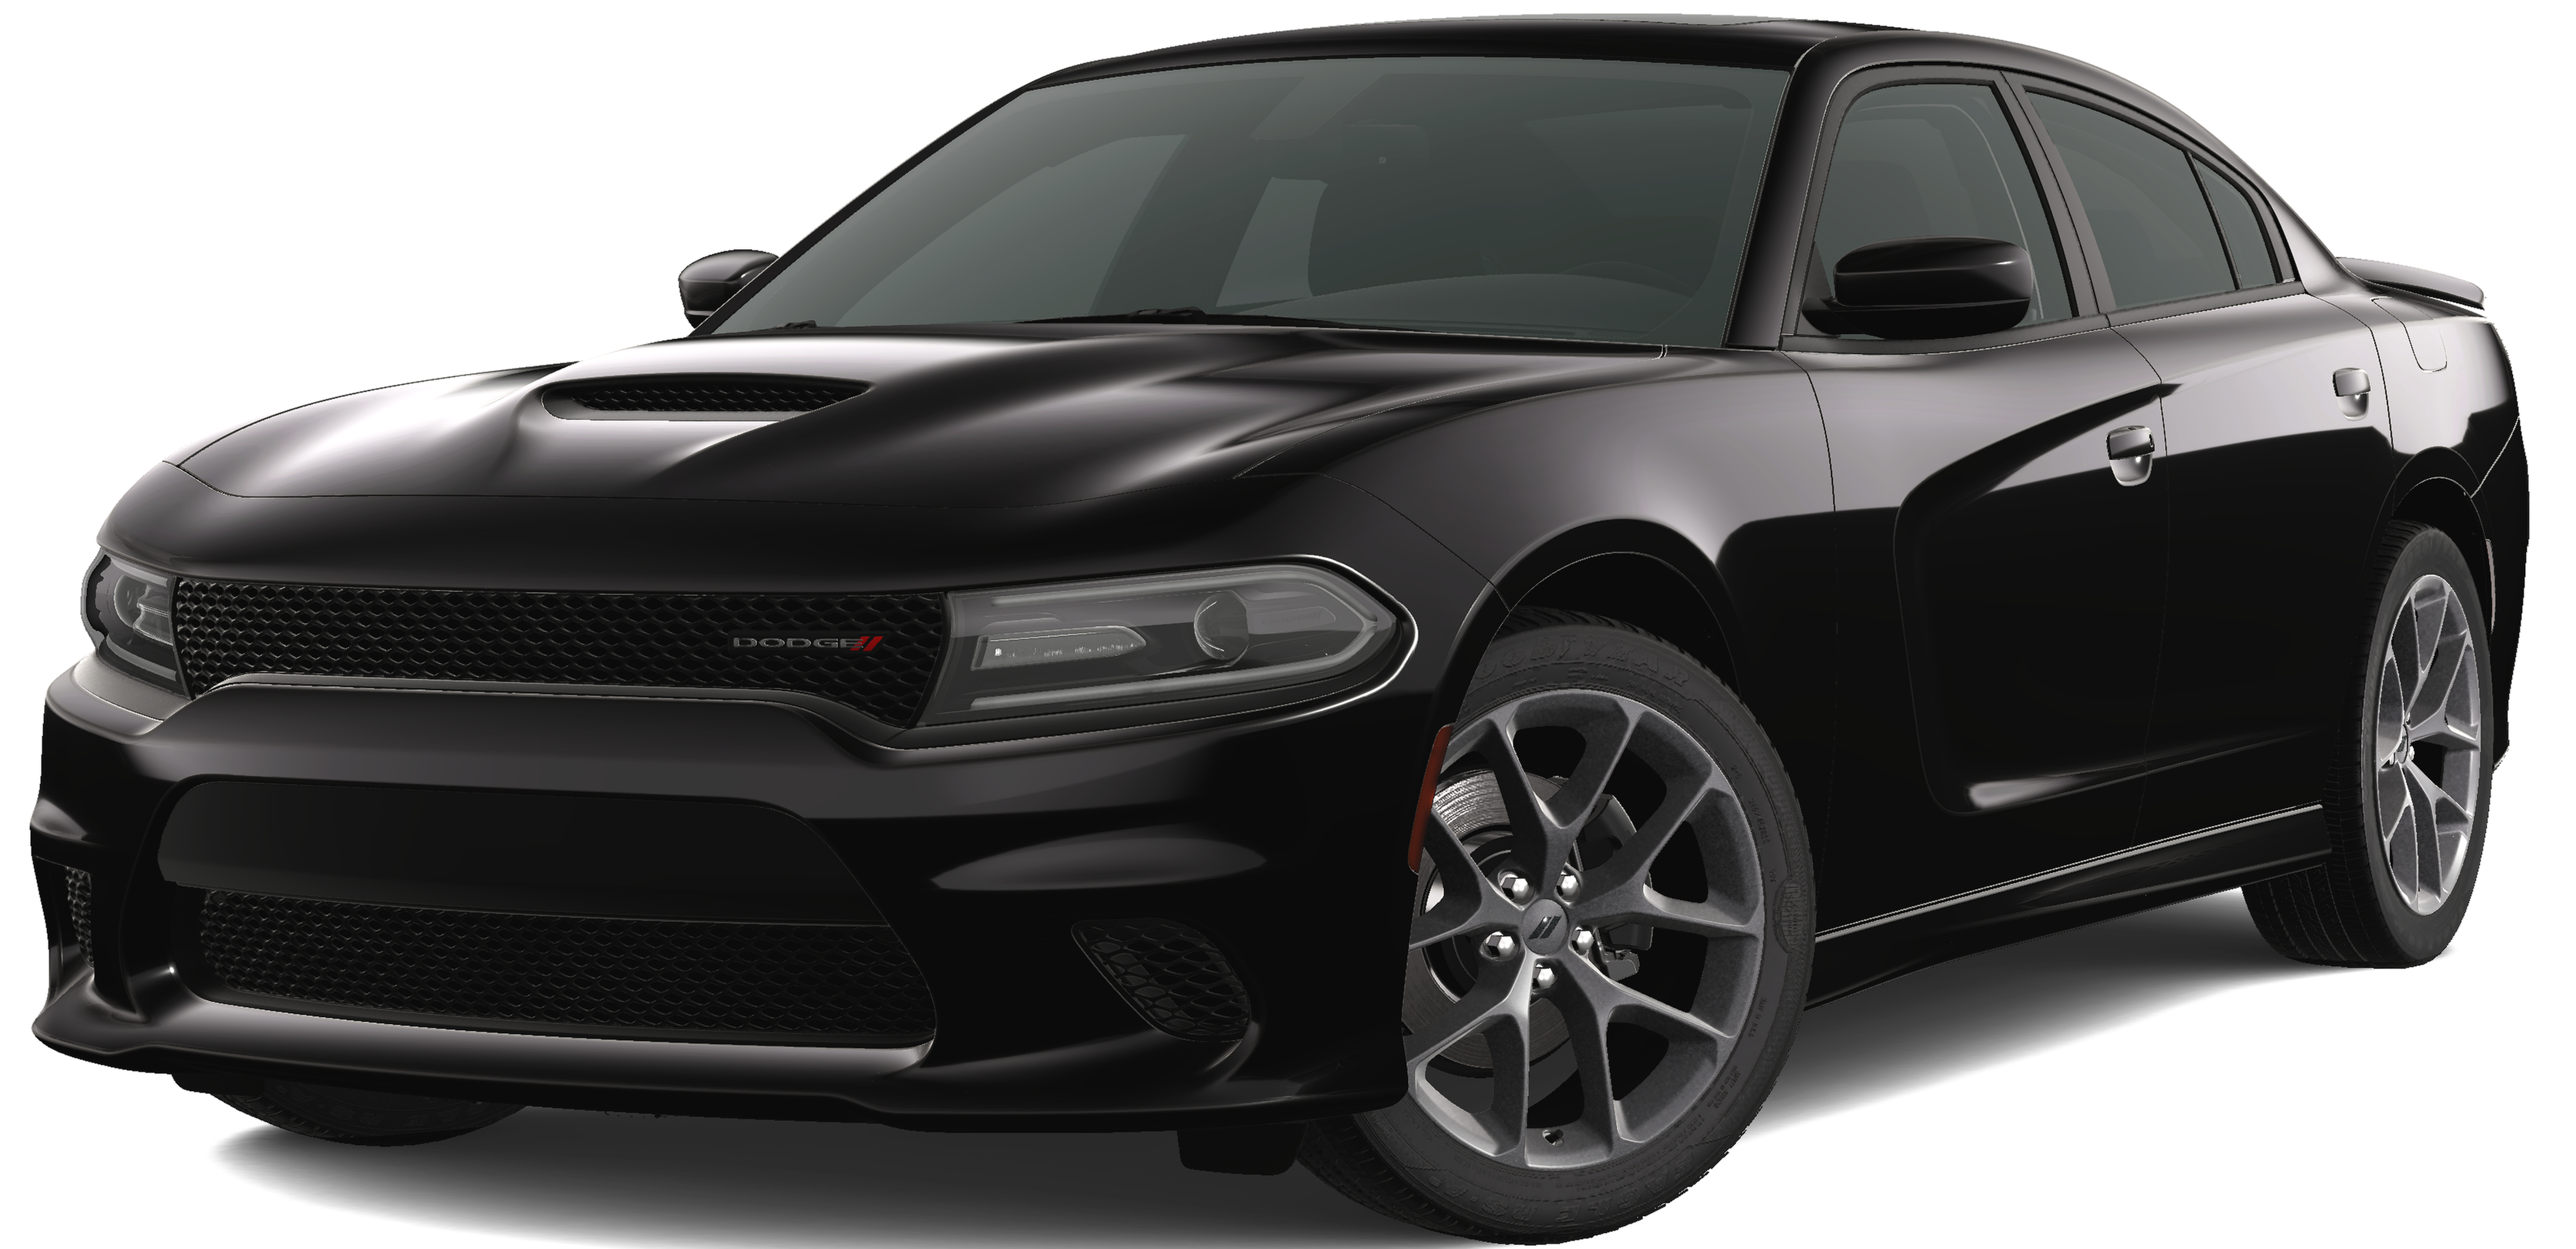 2023 Gt Charger Redesign